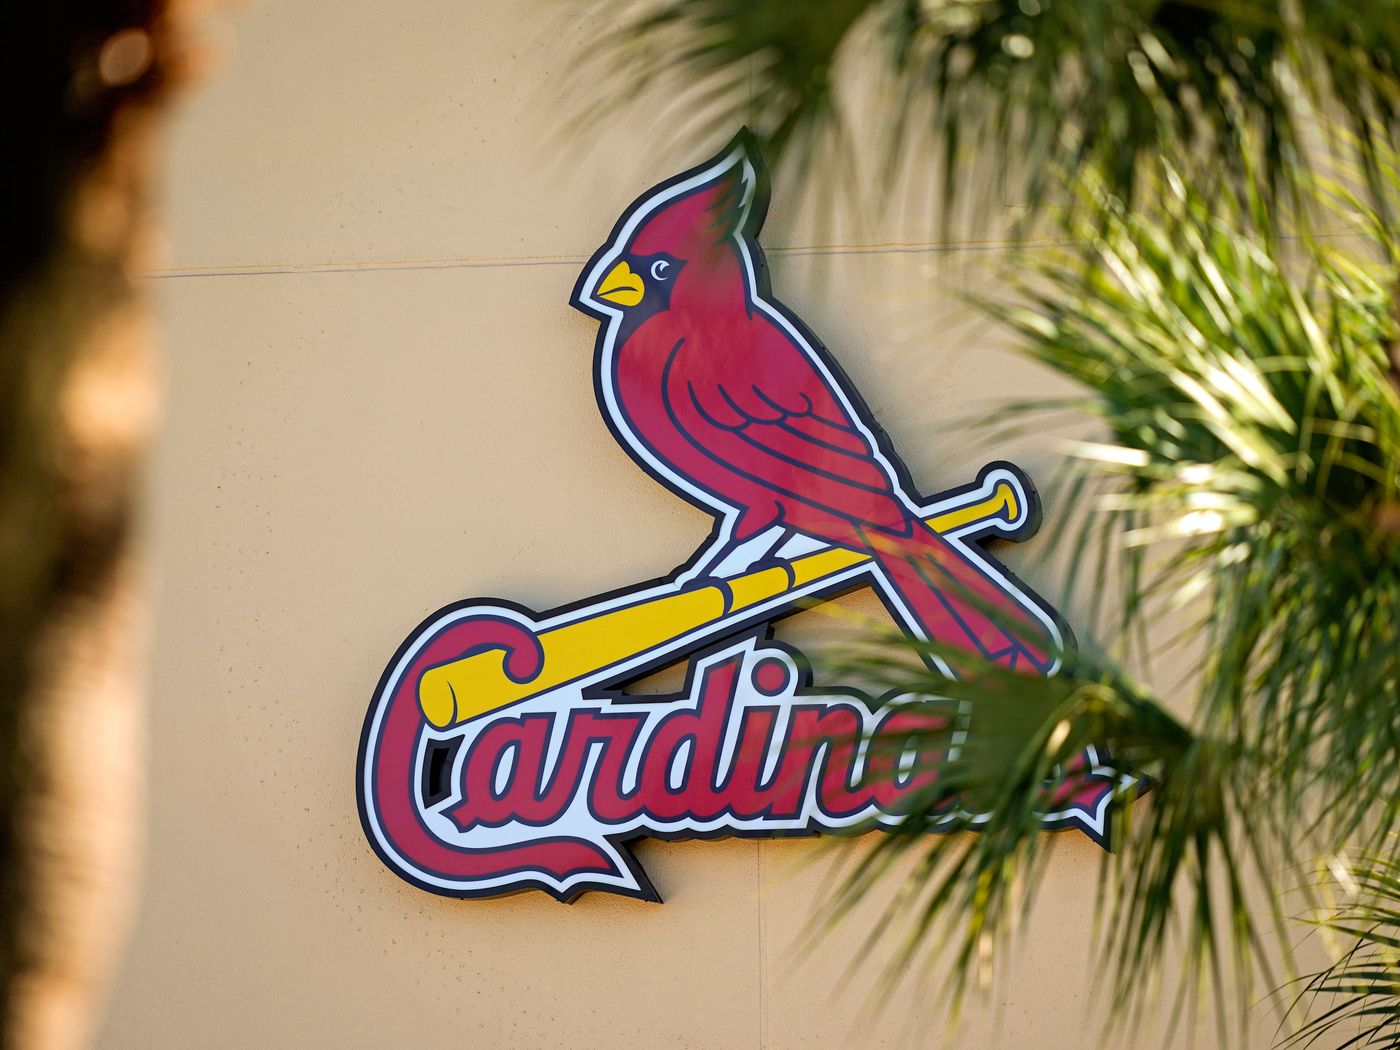 A history and ranking of the cardinals logo